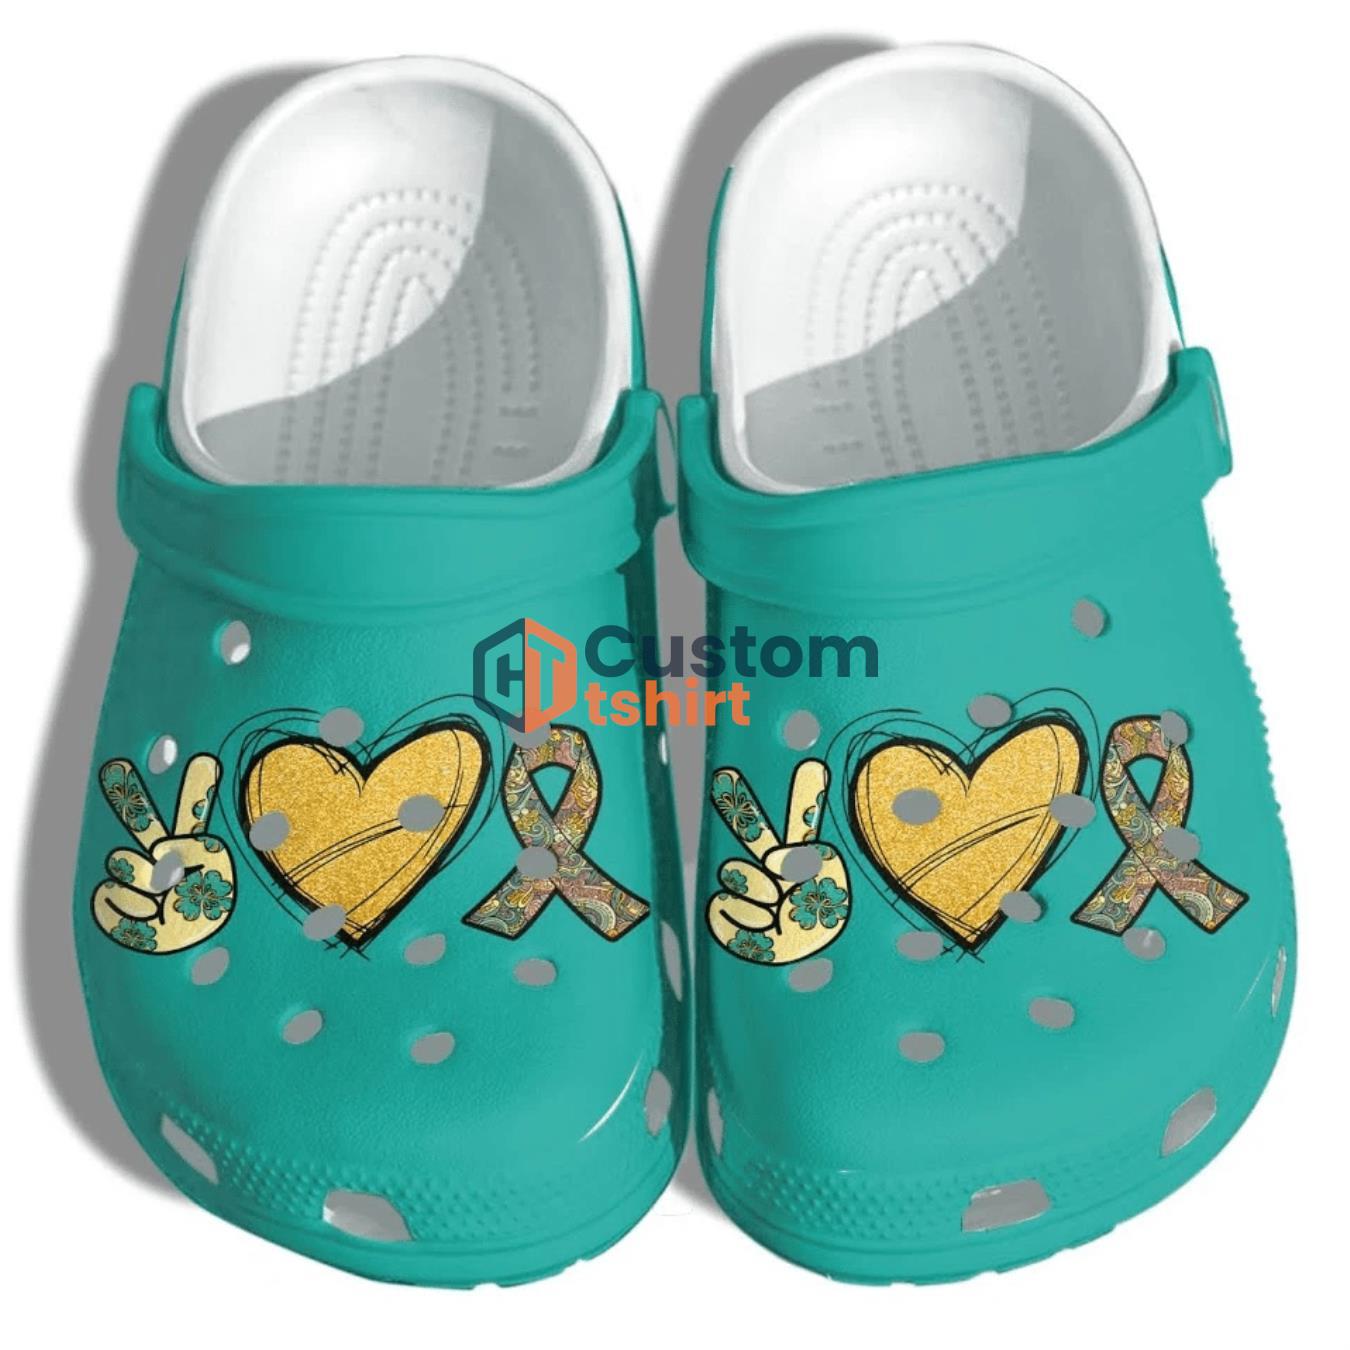 Peaces Hippie Love Clog Shoes - Hippie Cute Love Clog Shoes Gifts Daughter Girls Product Photo 1 Product photo 1